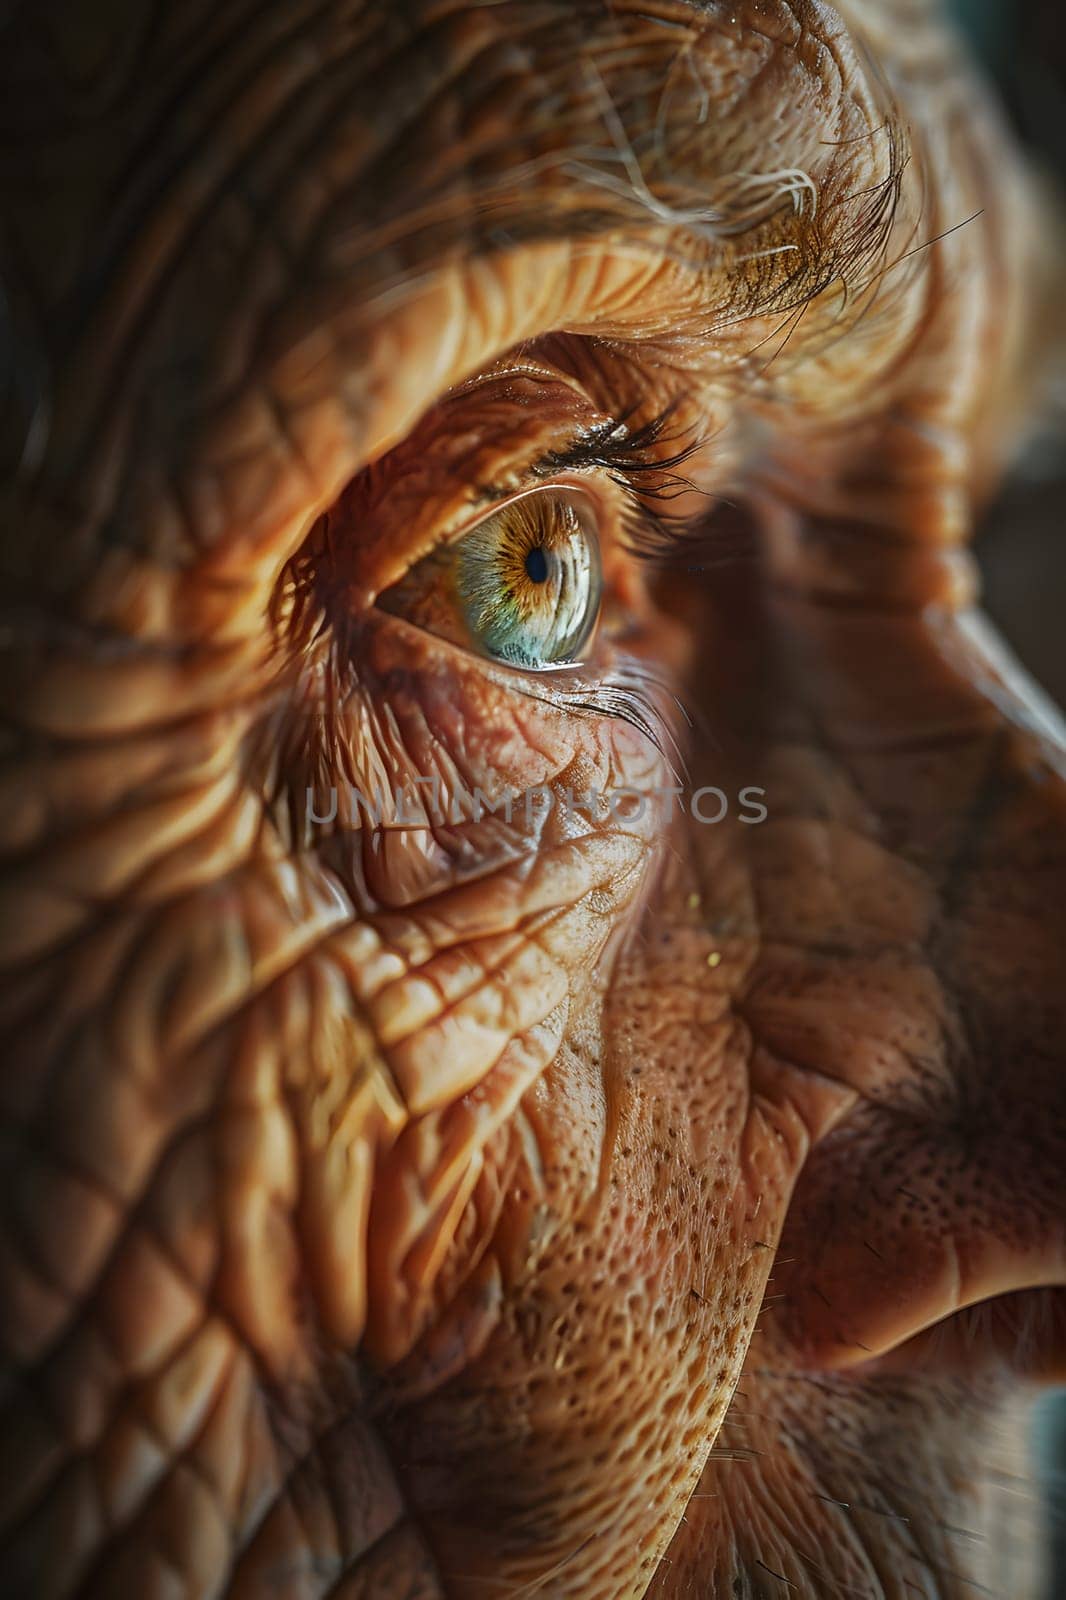 A closeup painting of an elderly womans eye with a green pupil, showcasing the intricate details of wrinkles and the vibrant colors of macro photography